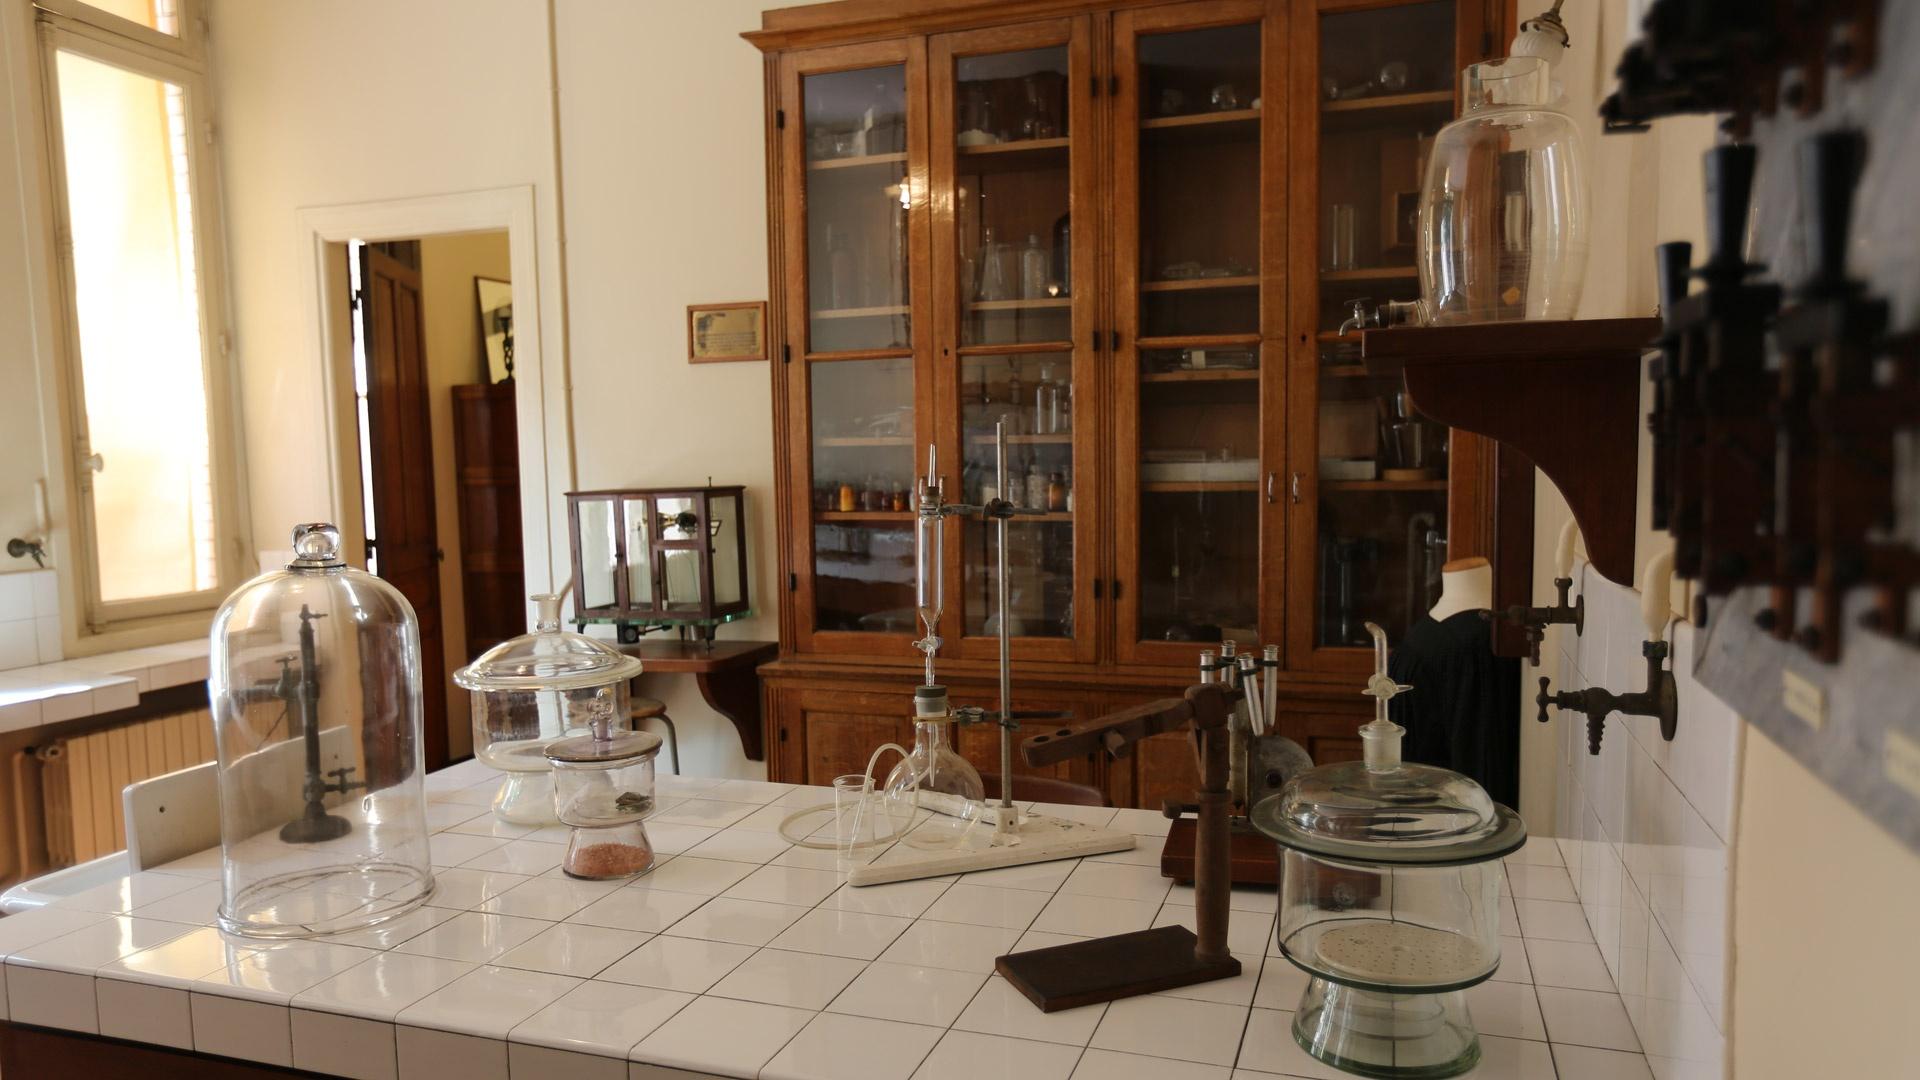 Marie Curie's laboratory in Paris, France.